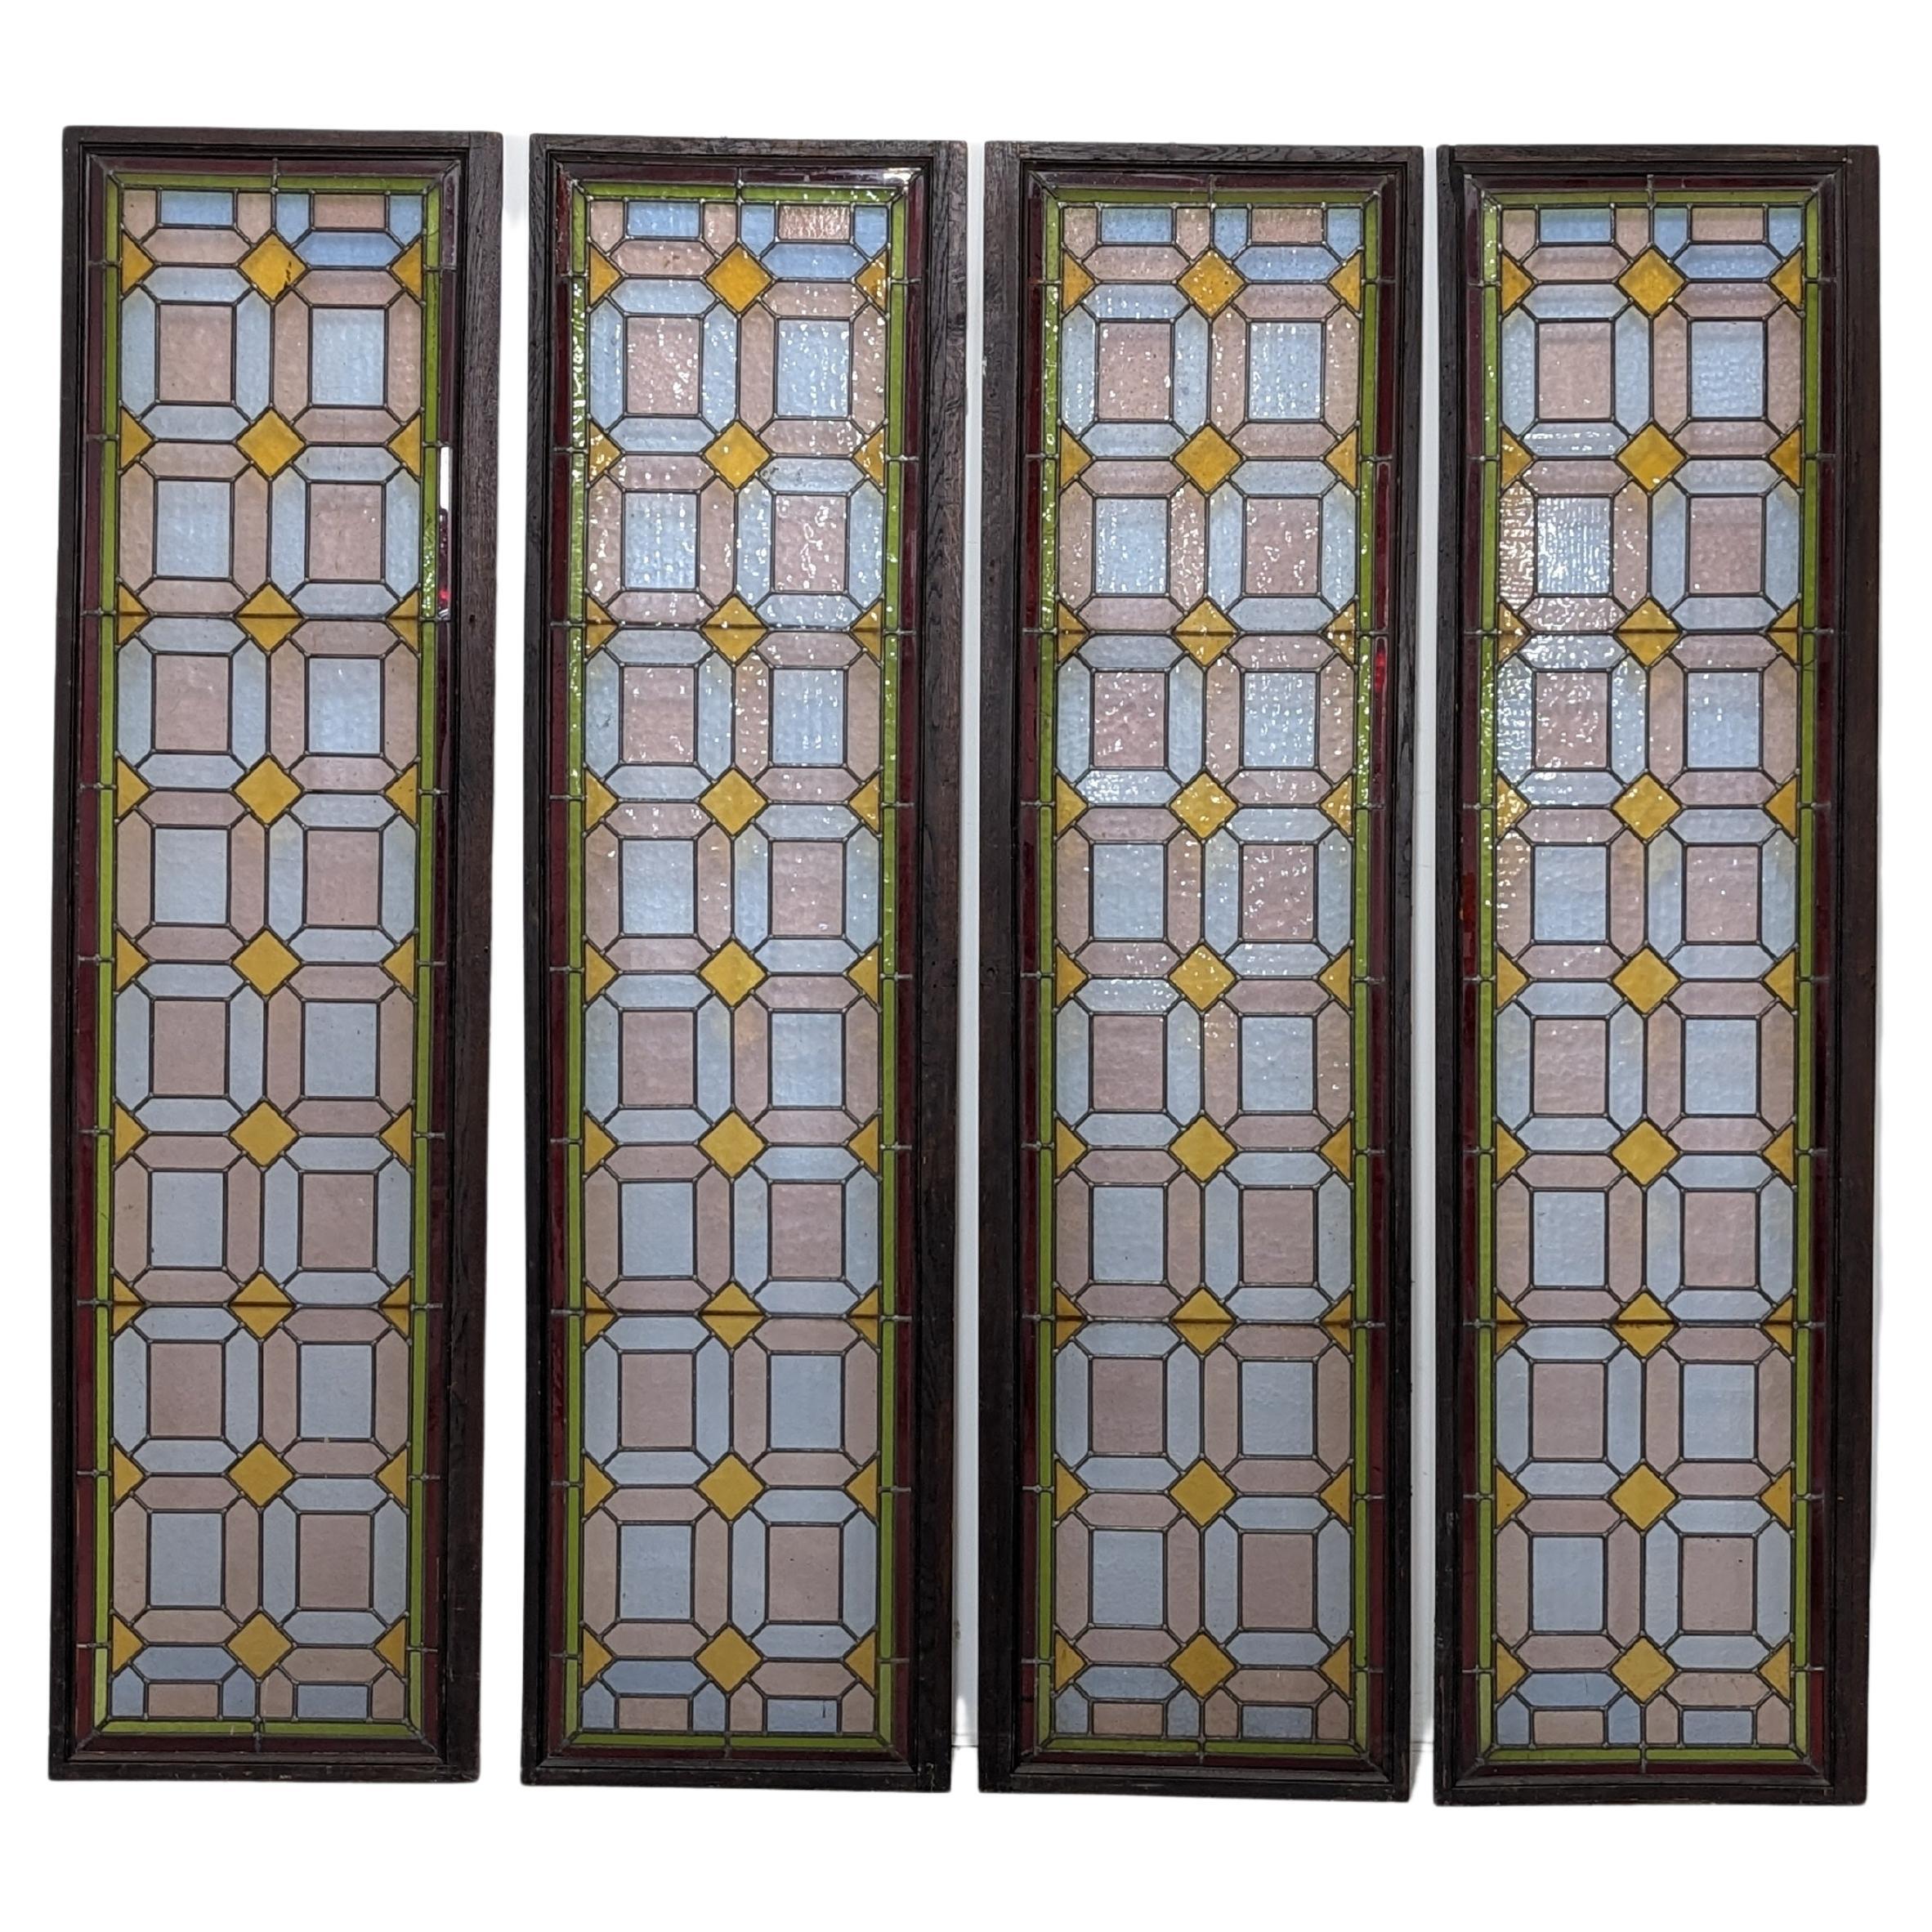 What era are stained glass windows from?